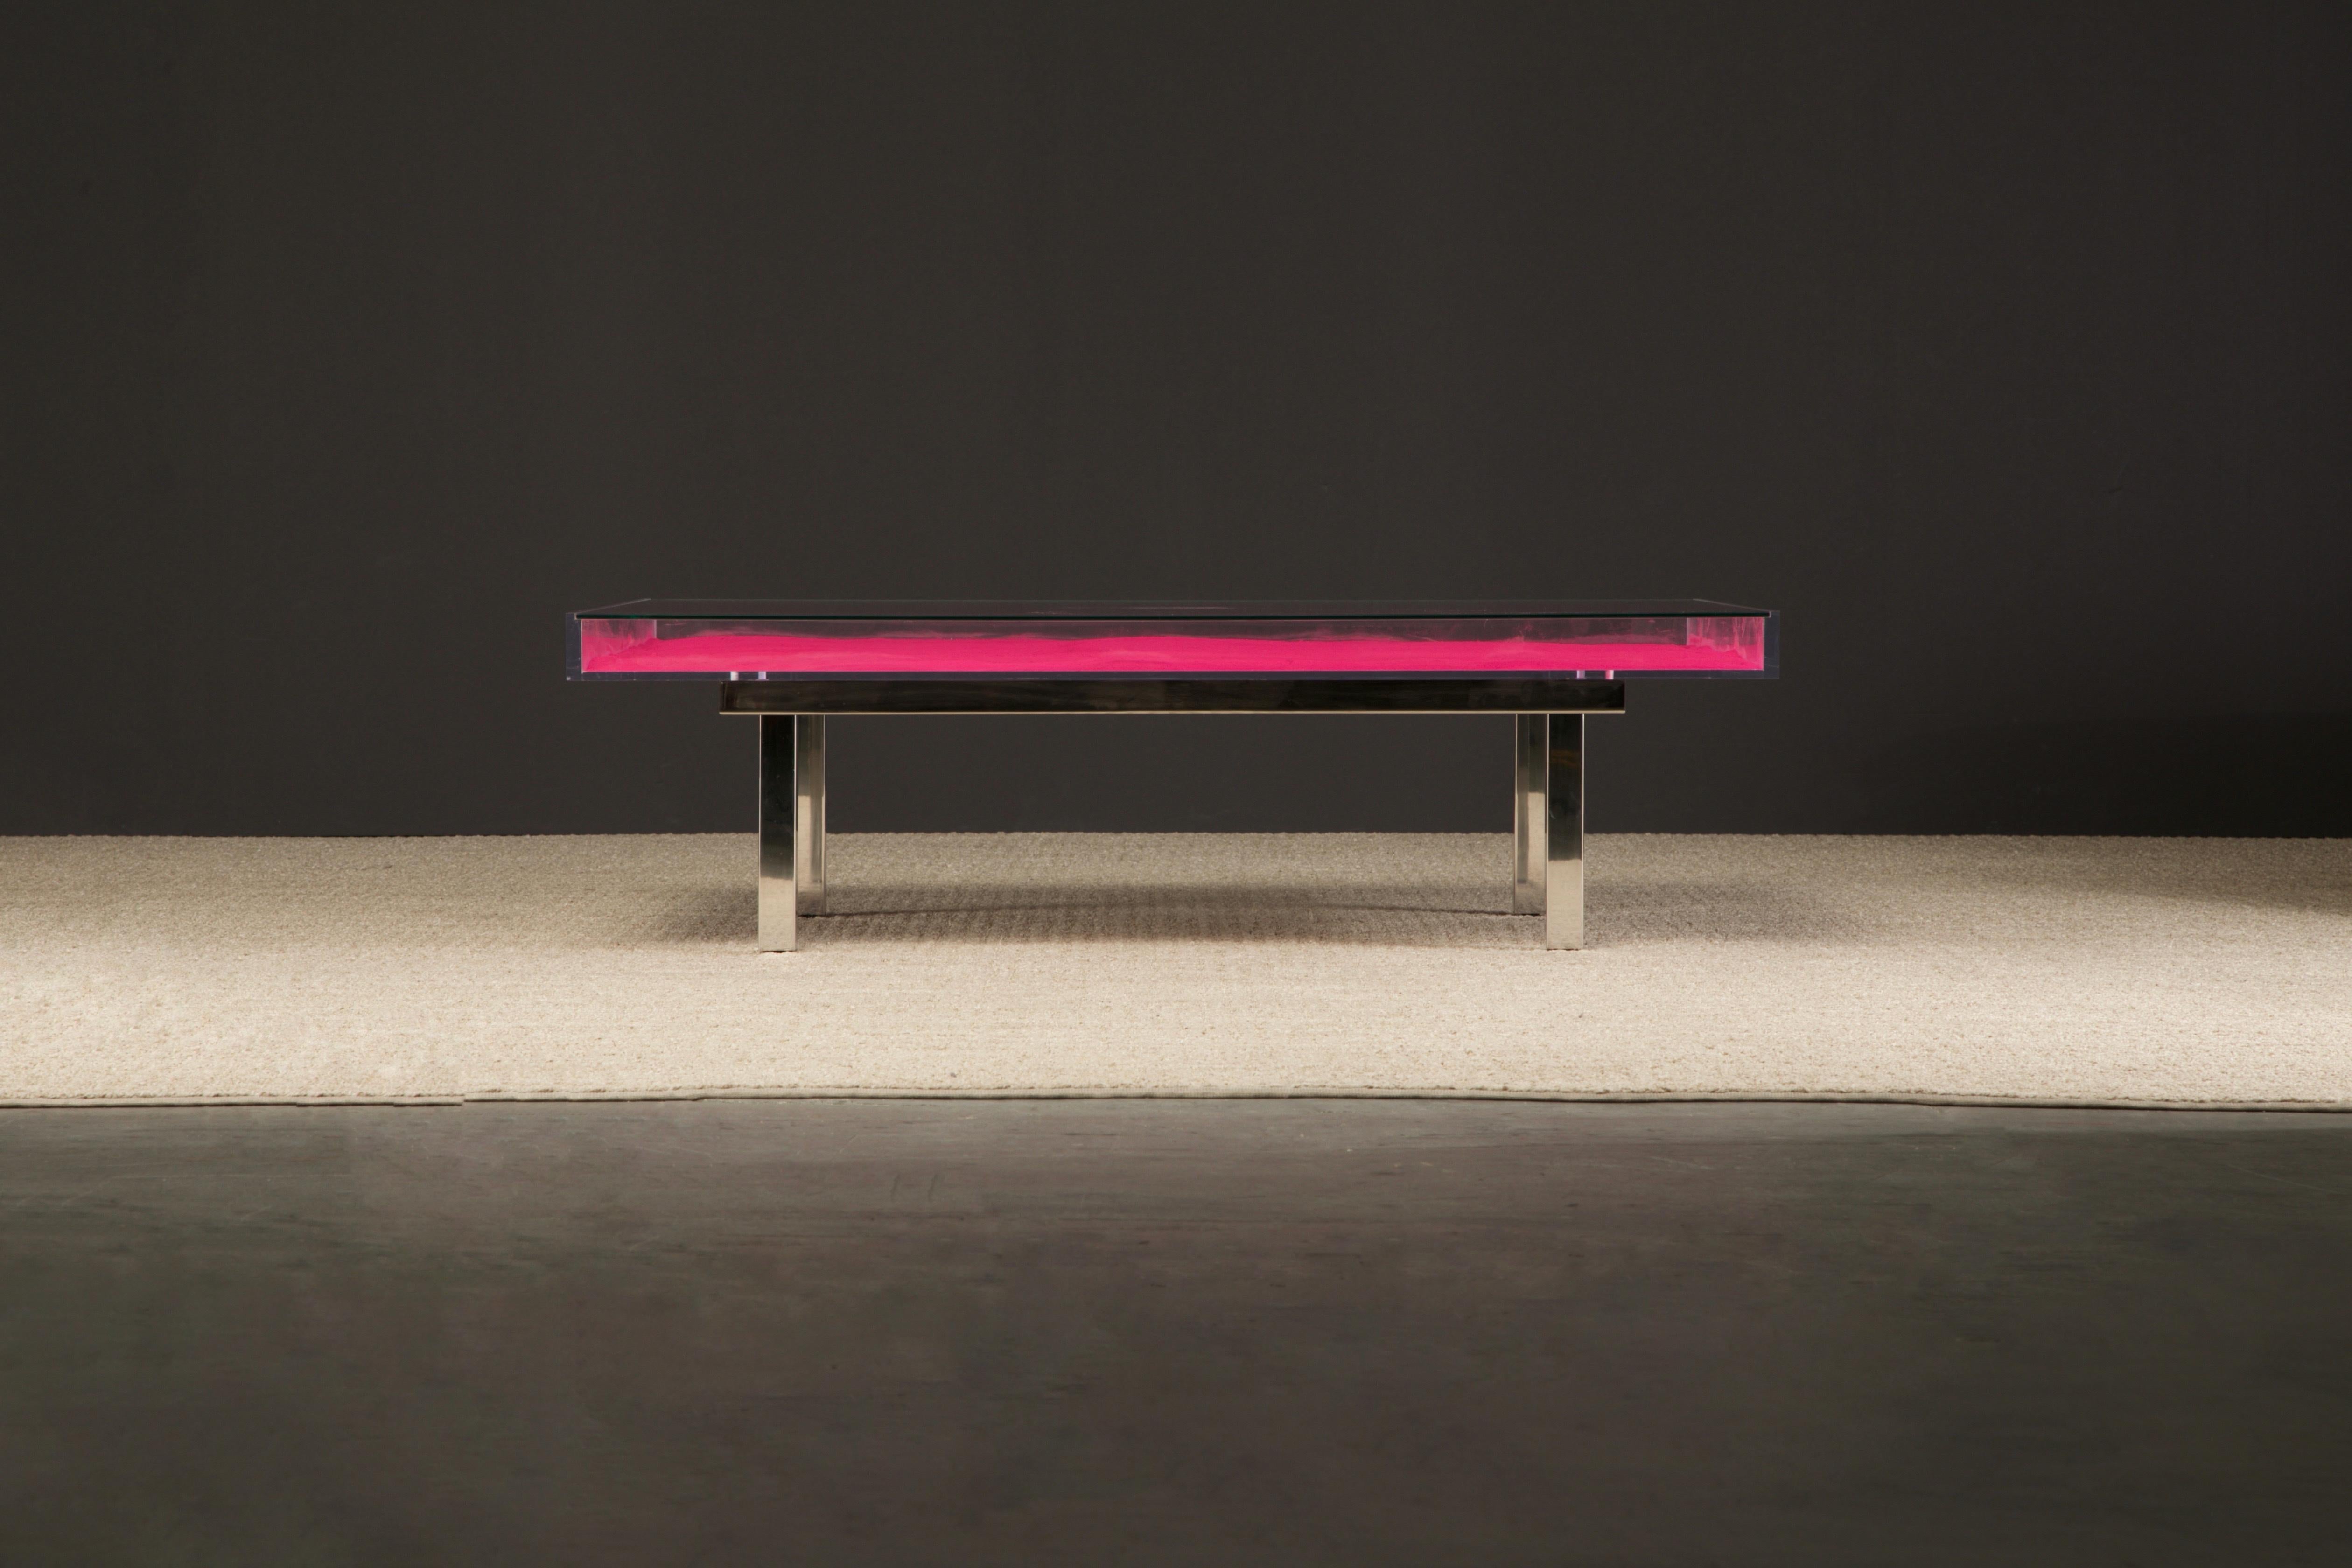 'Monopink' is a work of functional fine art by Yves Klein, this piece is from an edition begun in 1963 under the supervision of Rotraut Klein-Moquay in France, based on a 1961 model by Yves Klein. Affixed to the underside of the table is a signed